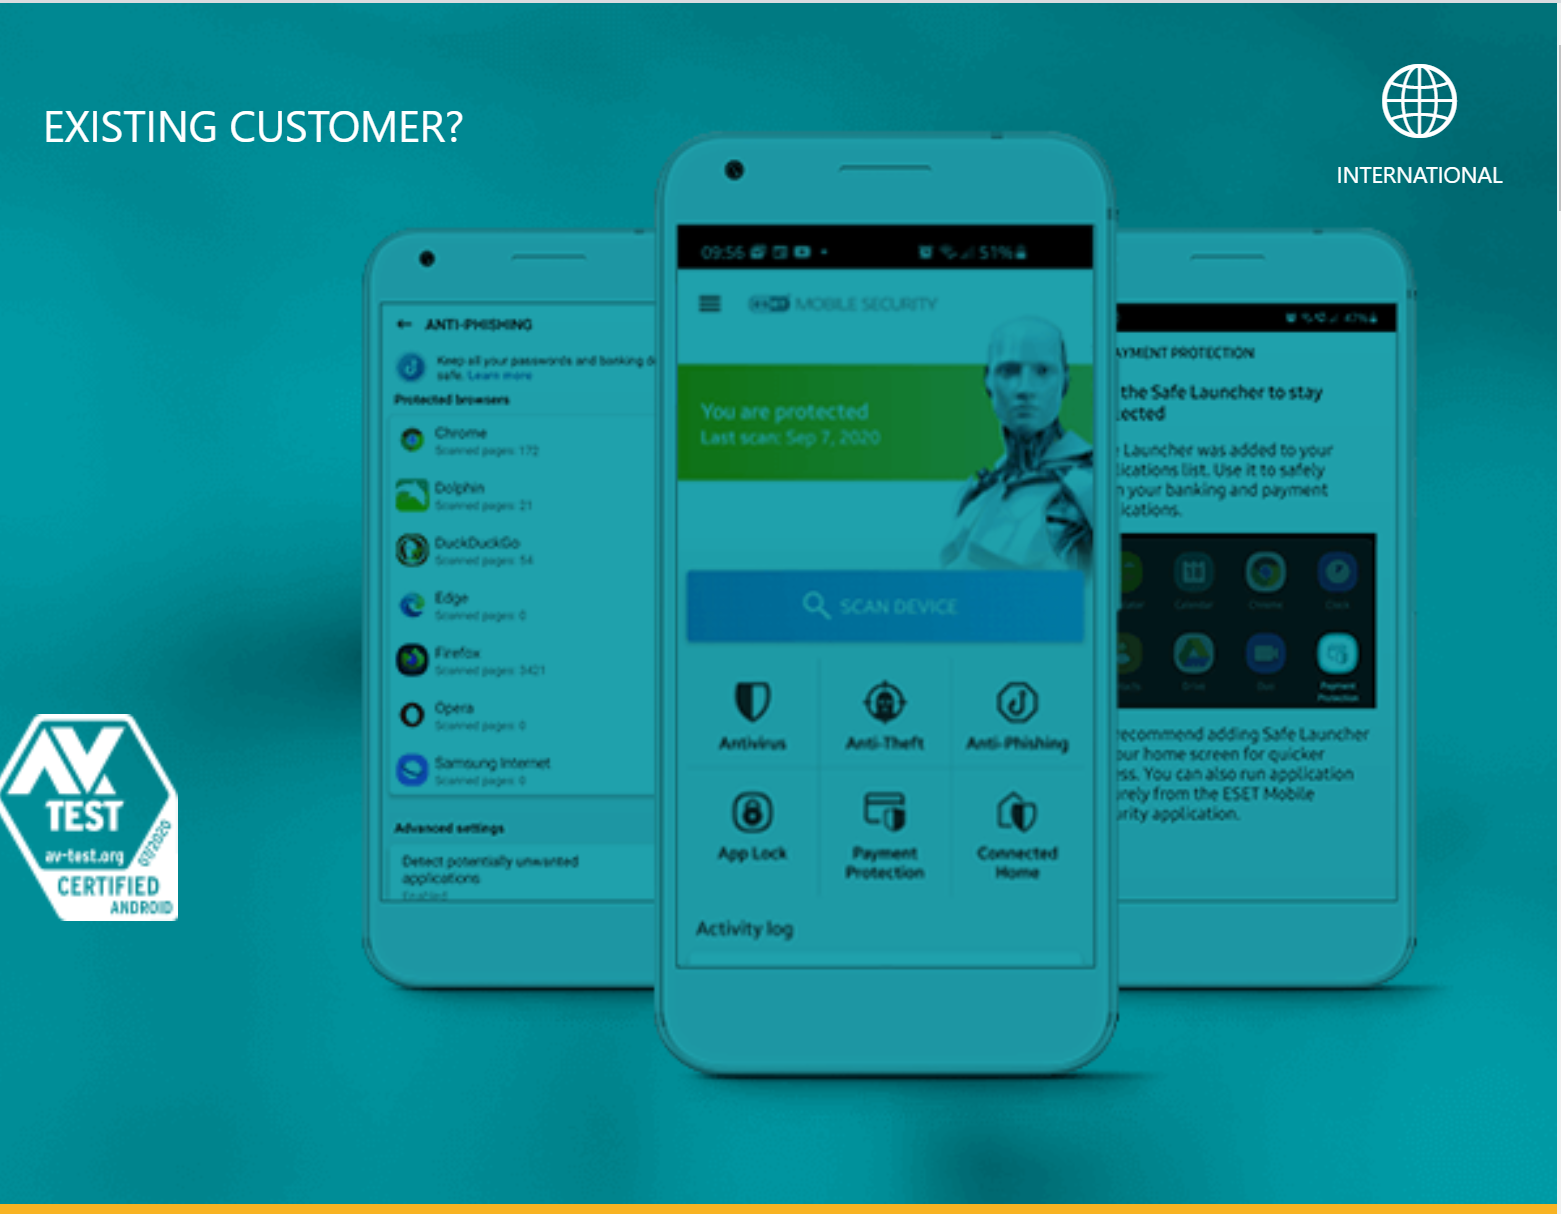 ESET Mobile Security for Android - provides protection and enhancements.